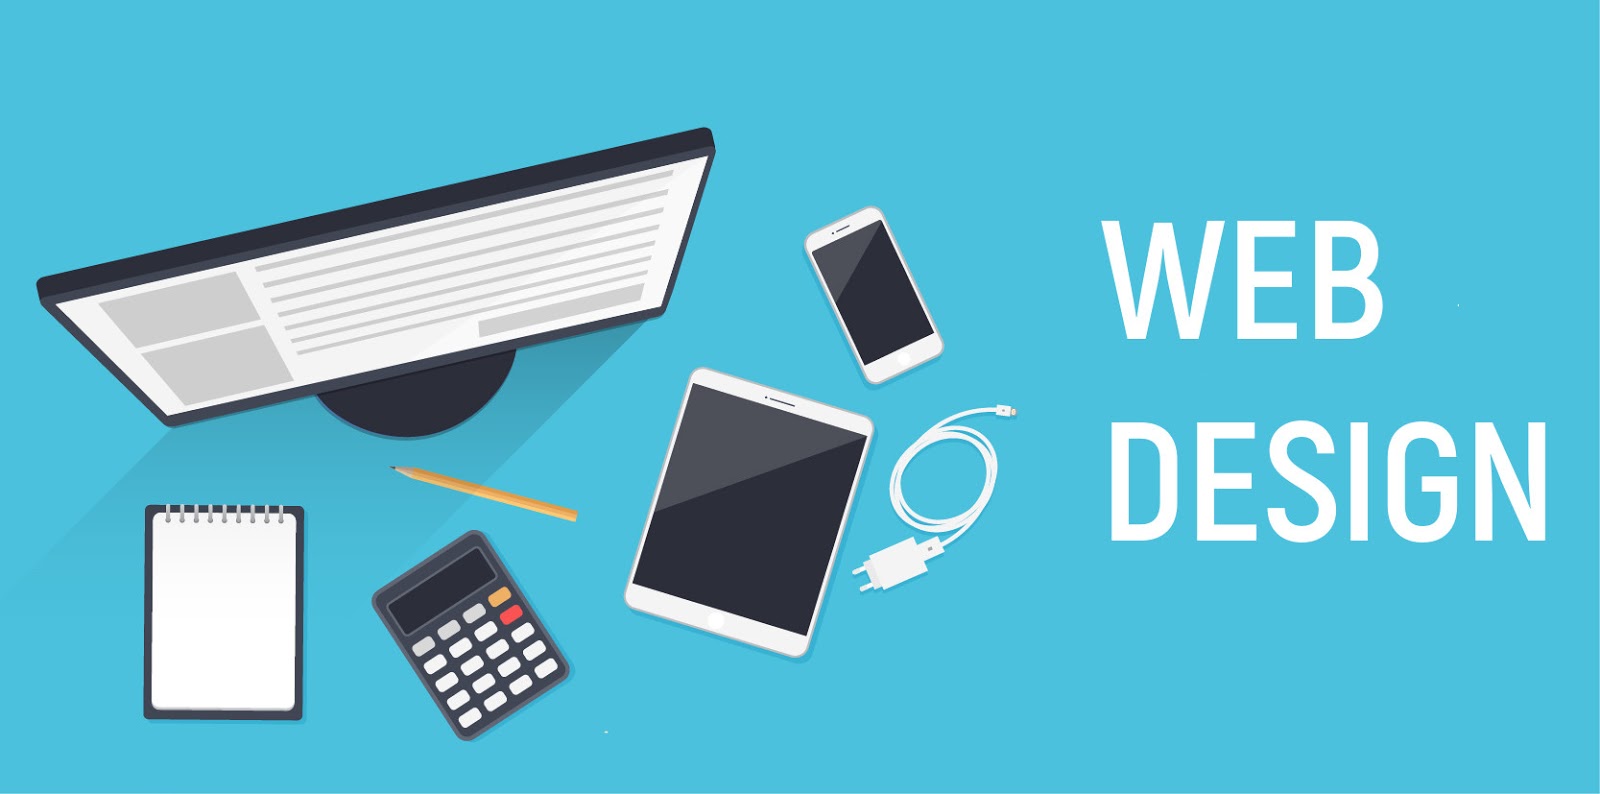 Web Design Basics You Want To Know